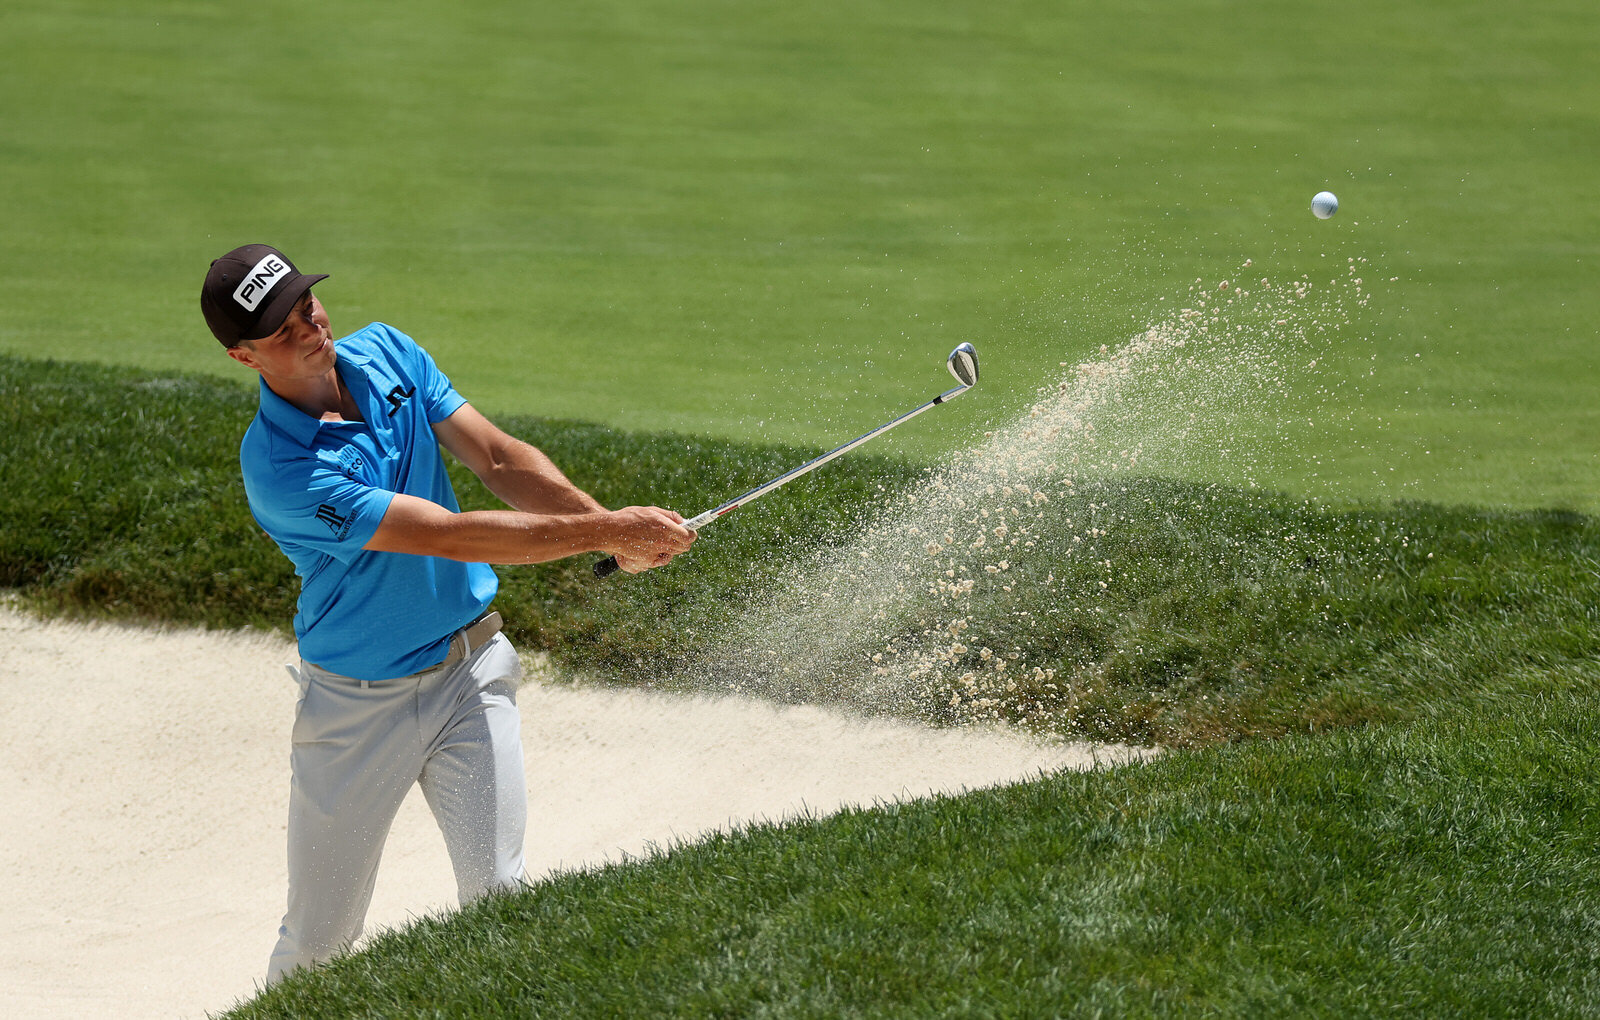  DUBLIN, OHIO - JULY 11: Viktor Hovland of Norway plays a shot from a bunker on the second hole during the third round of the Workday Charity Open on July 11, 2020 at Muirfield Village Golf Club in Dublin, Ohio. (Photo by Gregory Shamus/Getty Images)